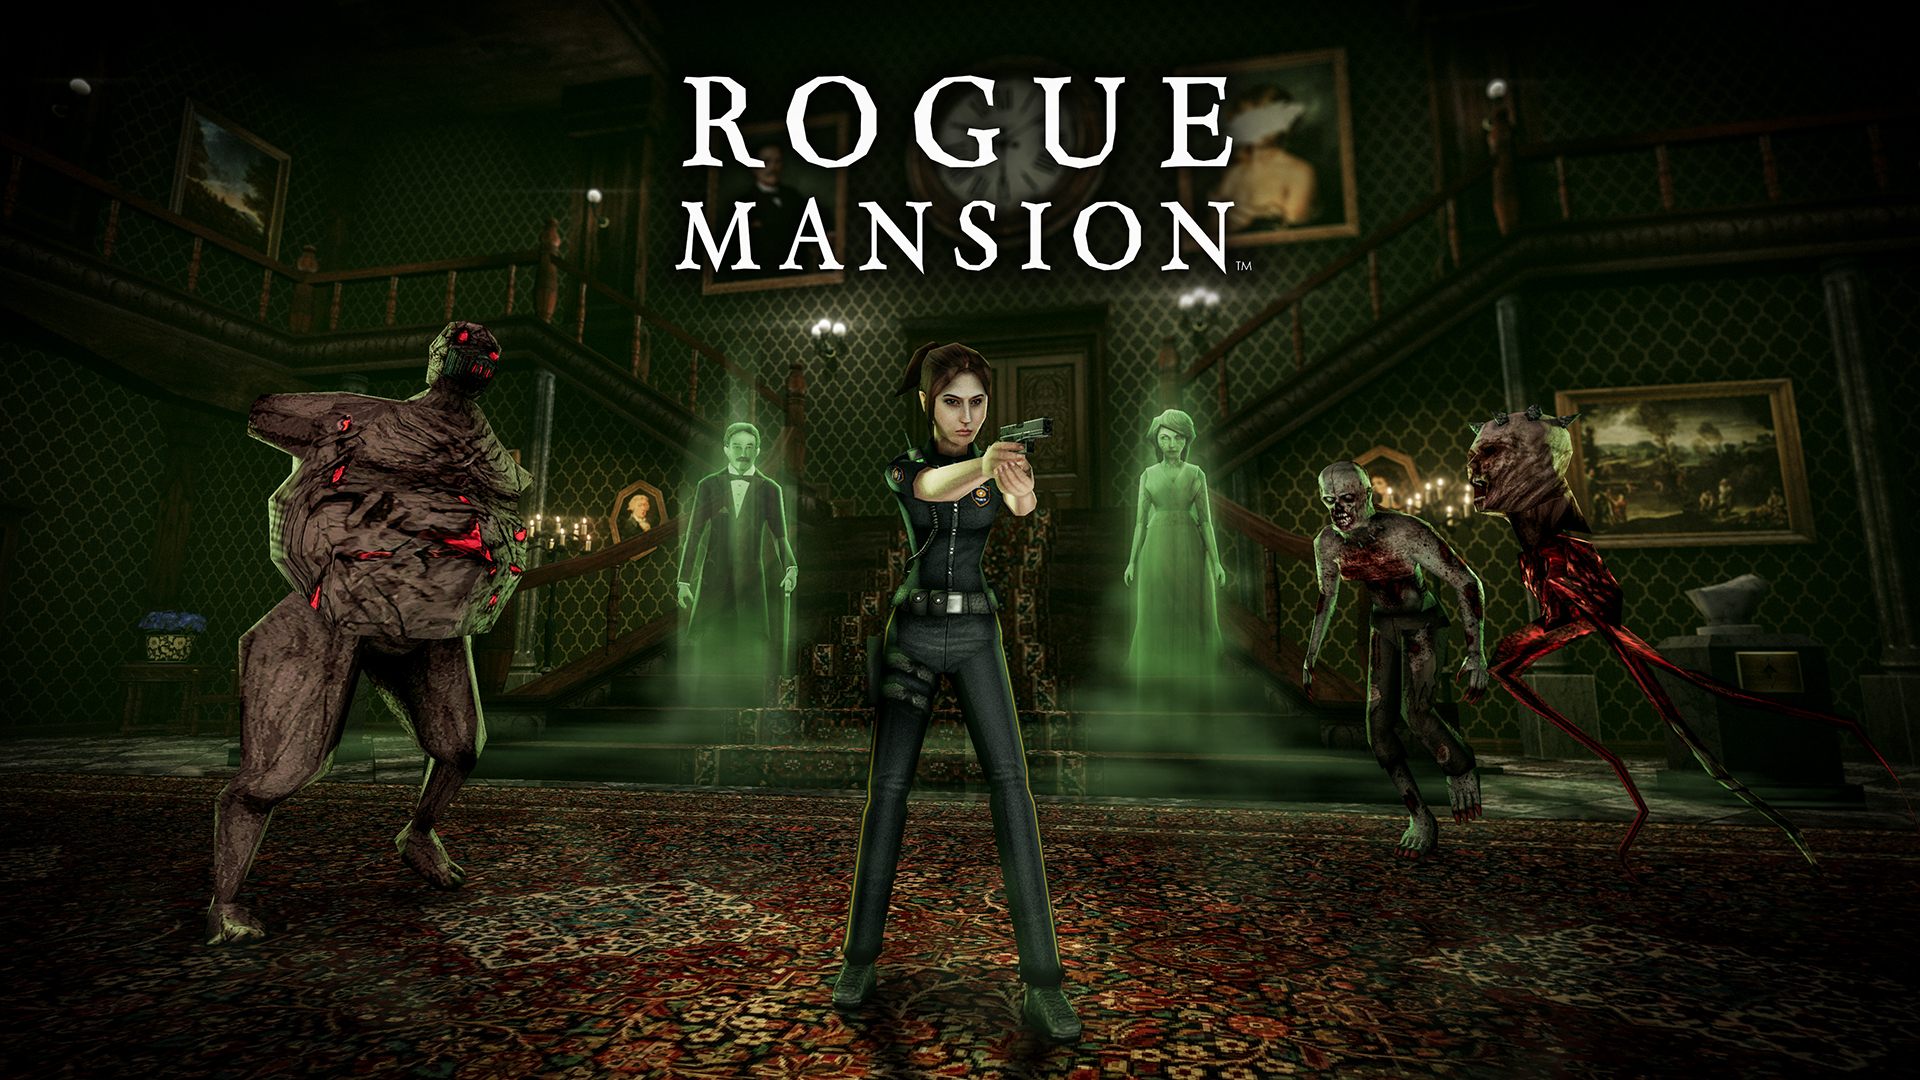 Key art for Rogue Mansion